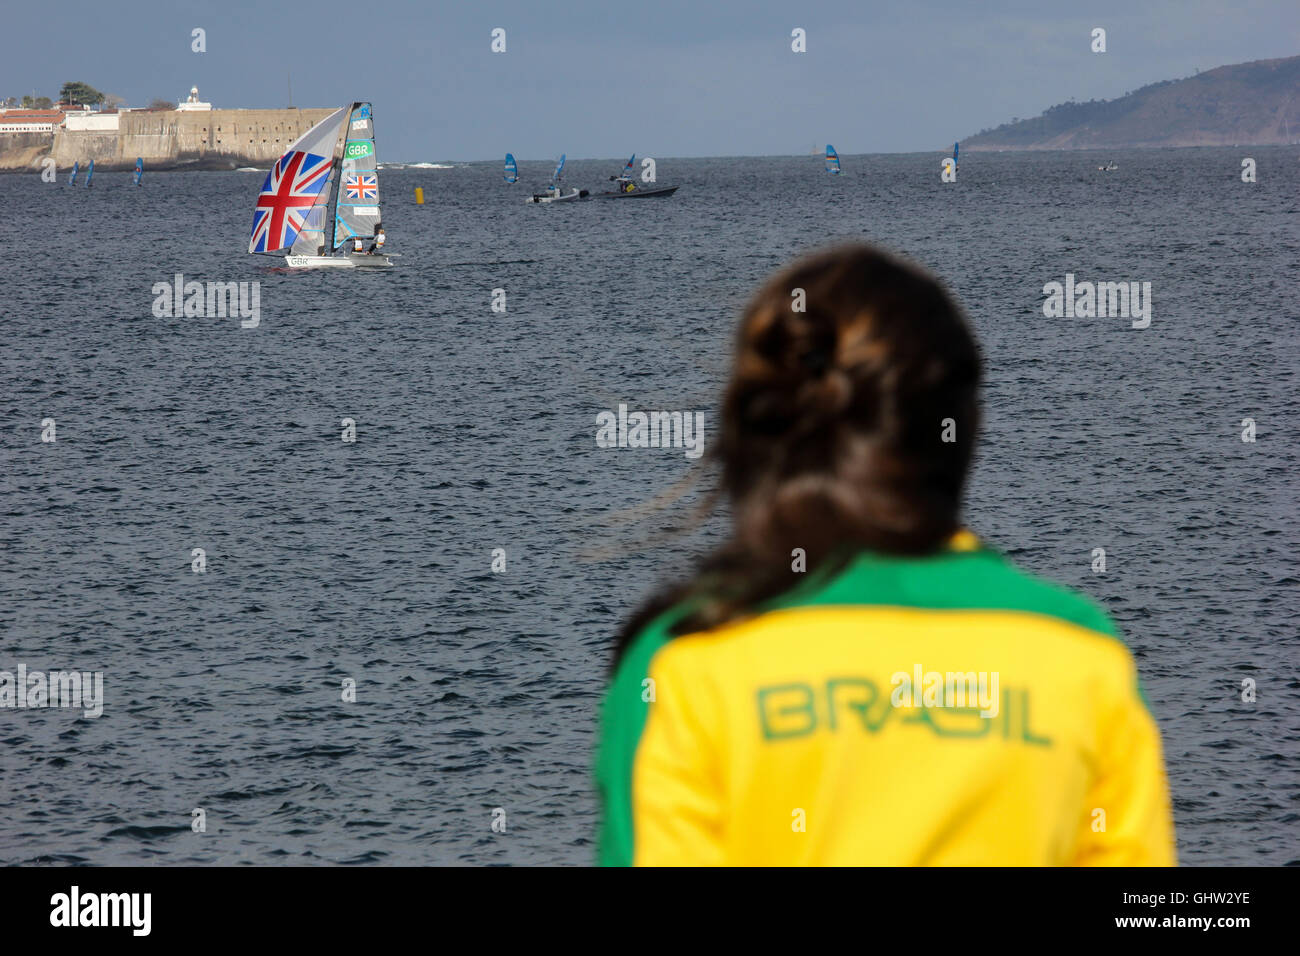 Rio de Janeiro, Brazil. 11th August 2016. Athletes from different countries take part in the sailing competitions for the 2016 Olympic Games, in the waters of Guanabara Bay, in Rio de Janeiro. Popular enjoy the Gloria Marina to the waterfront to watch the competitions without buying tickets. Credit:  Luiz Souza/Alamy Live News Stock Photo